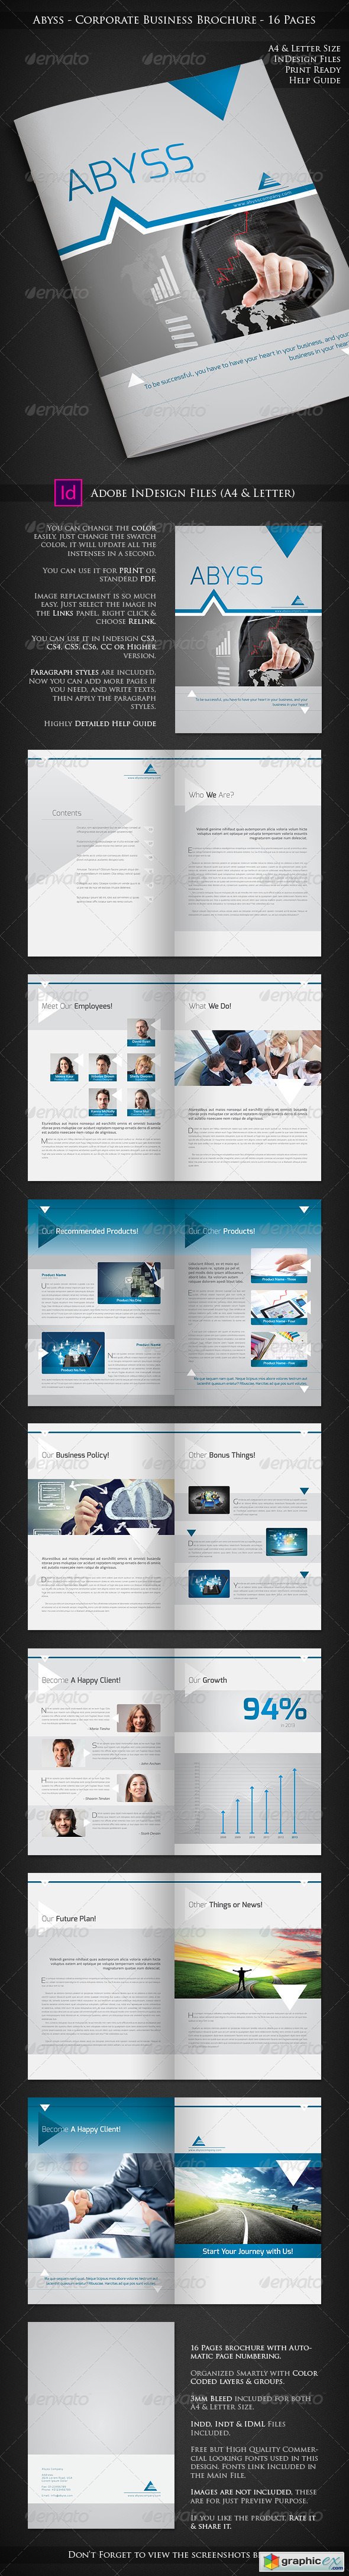 Abyss - Corporate Business Brochure - 16 Pages